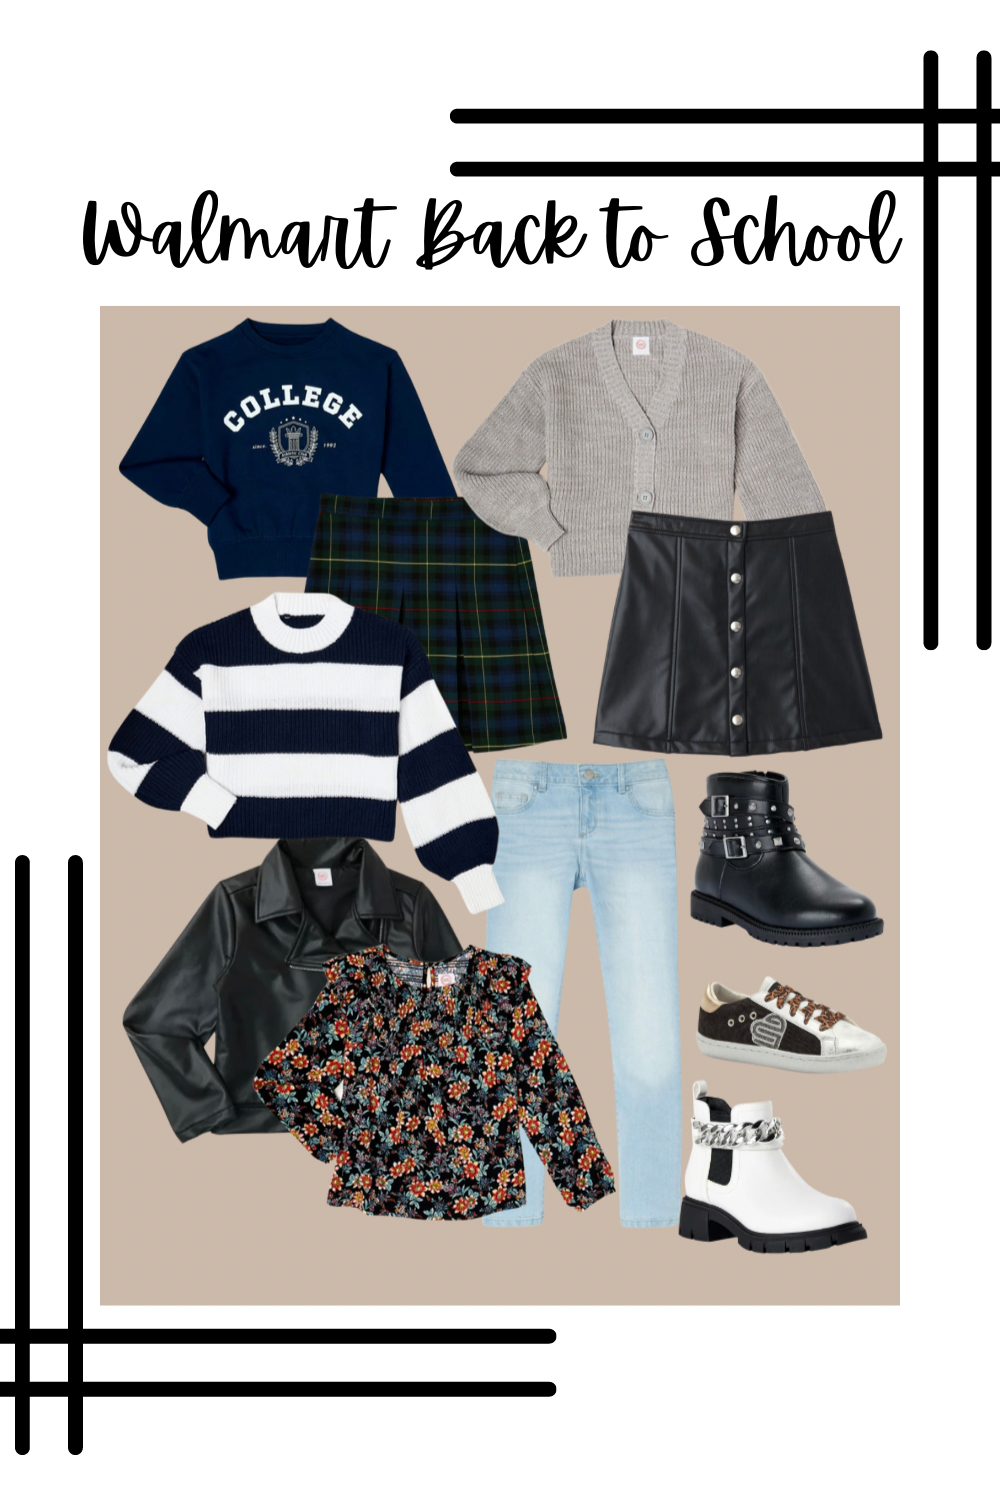 Back to School Outfits for a Middle School Girl